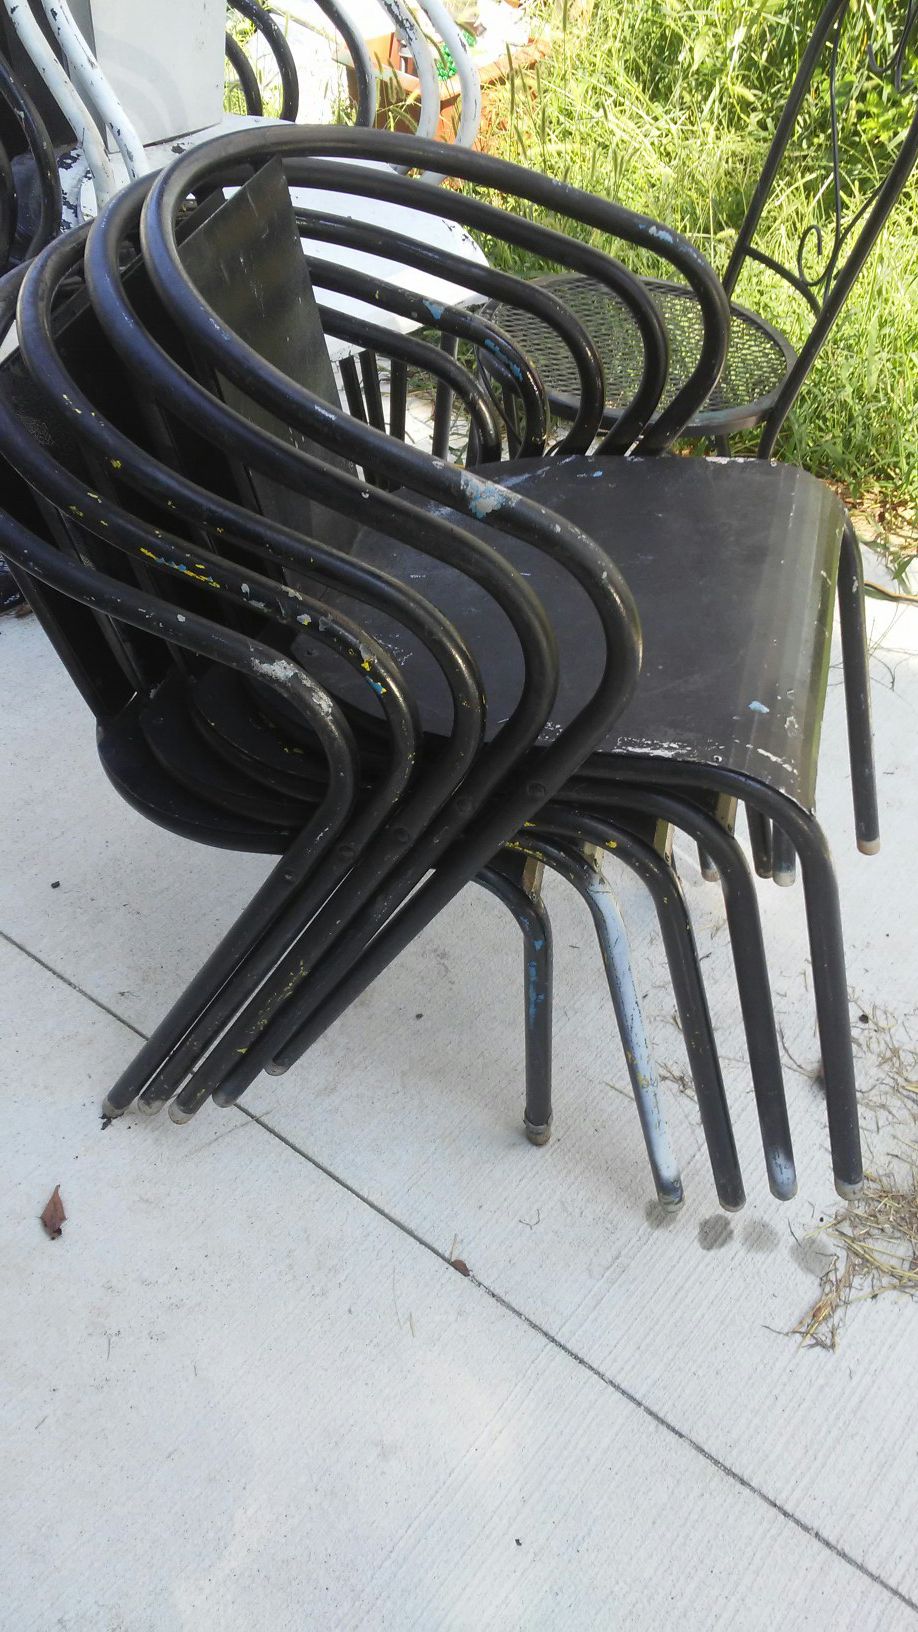 Patio chairs (10 total)